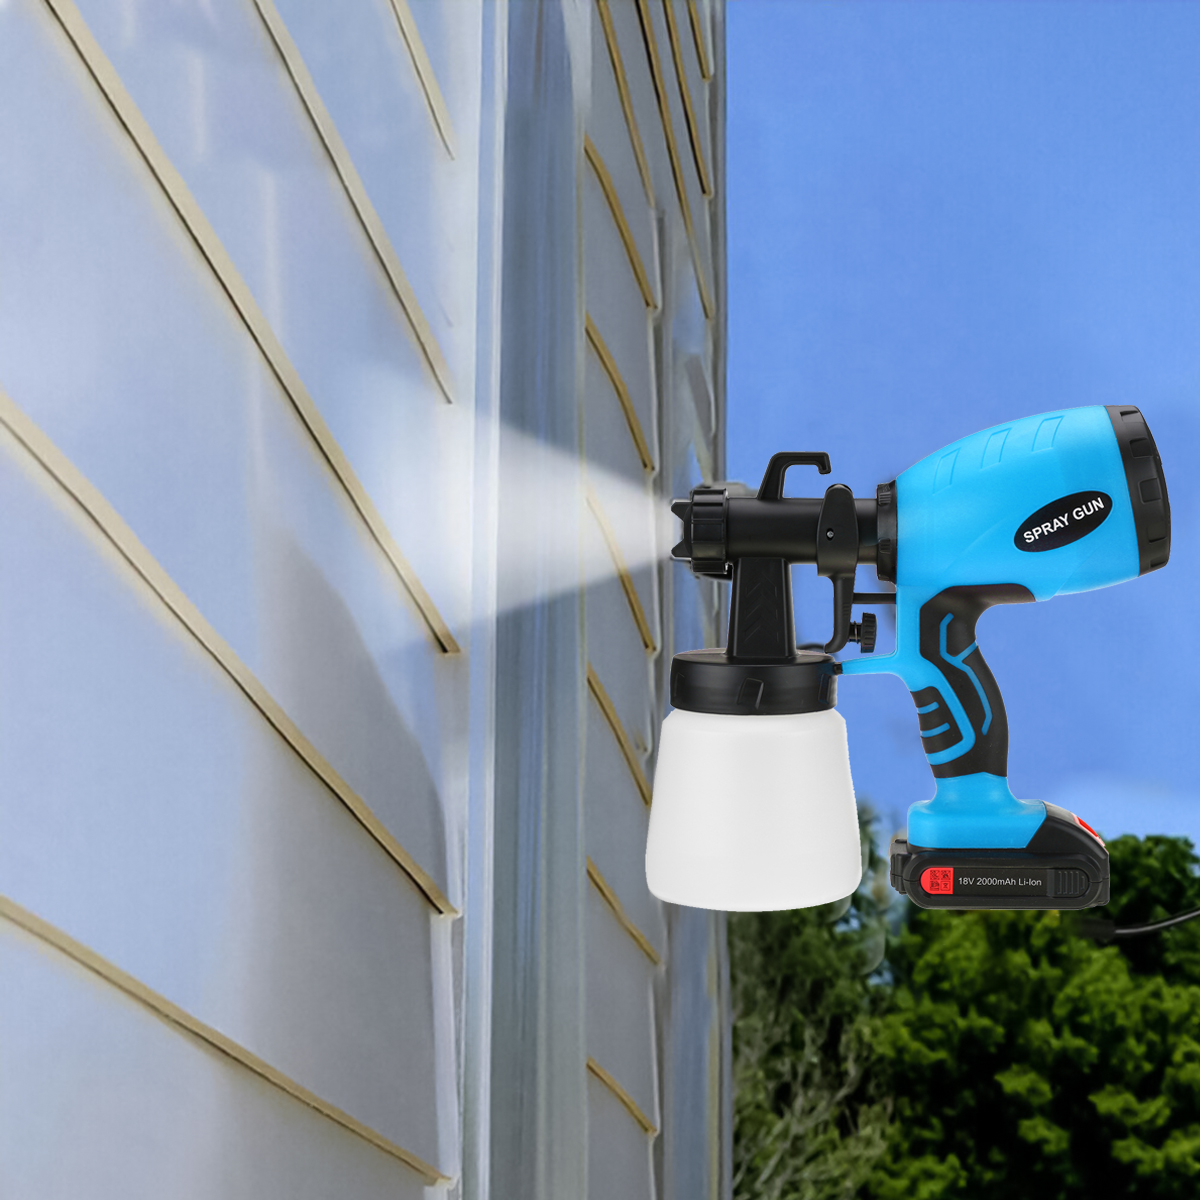 2000mAh-Portable-Electric-Paint-Sprayer-Wireless-Handheld-Spray-Guns-Home-Indoor-Fence-Painting-Tool-1851241-6